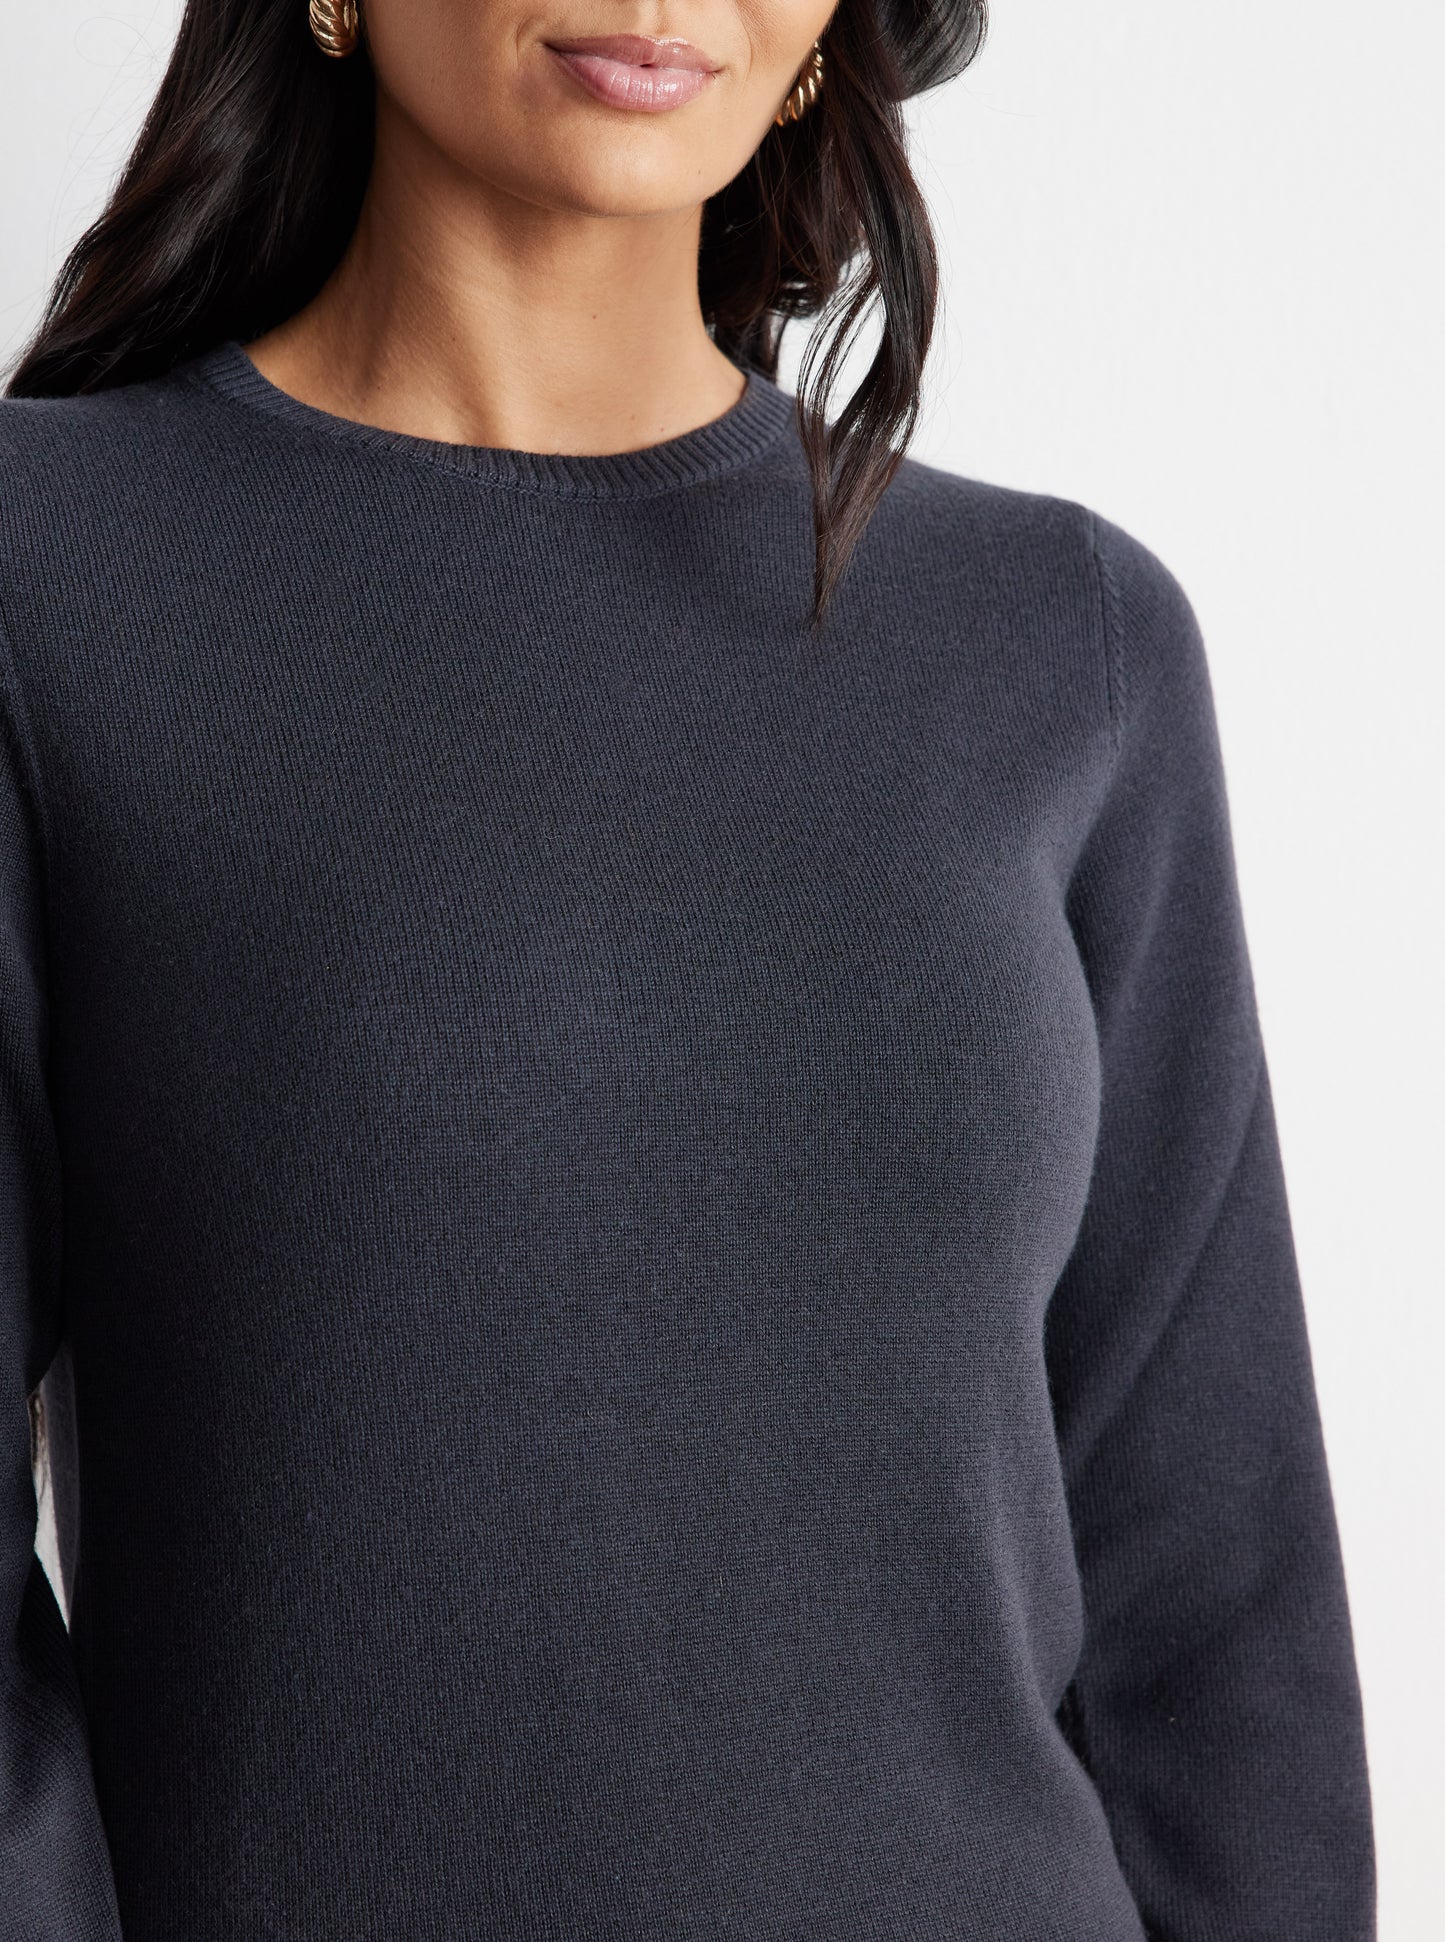 100% Cashmere Sweater - Charcoal